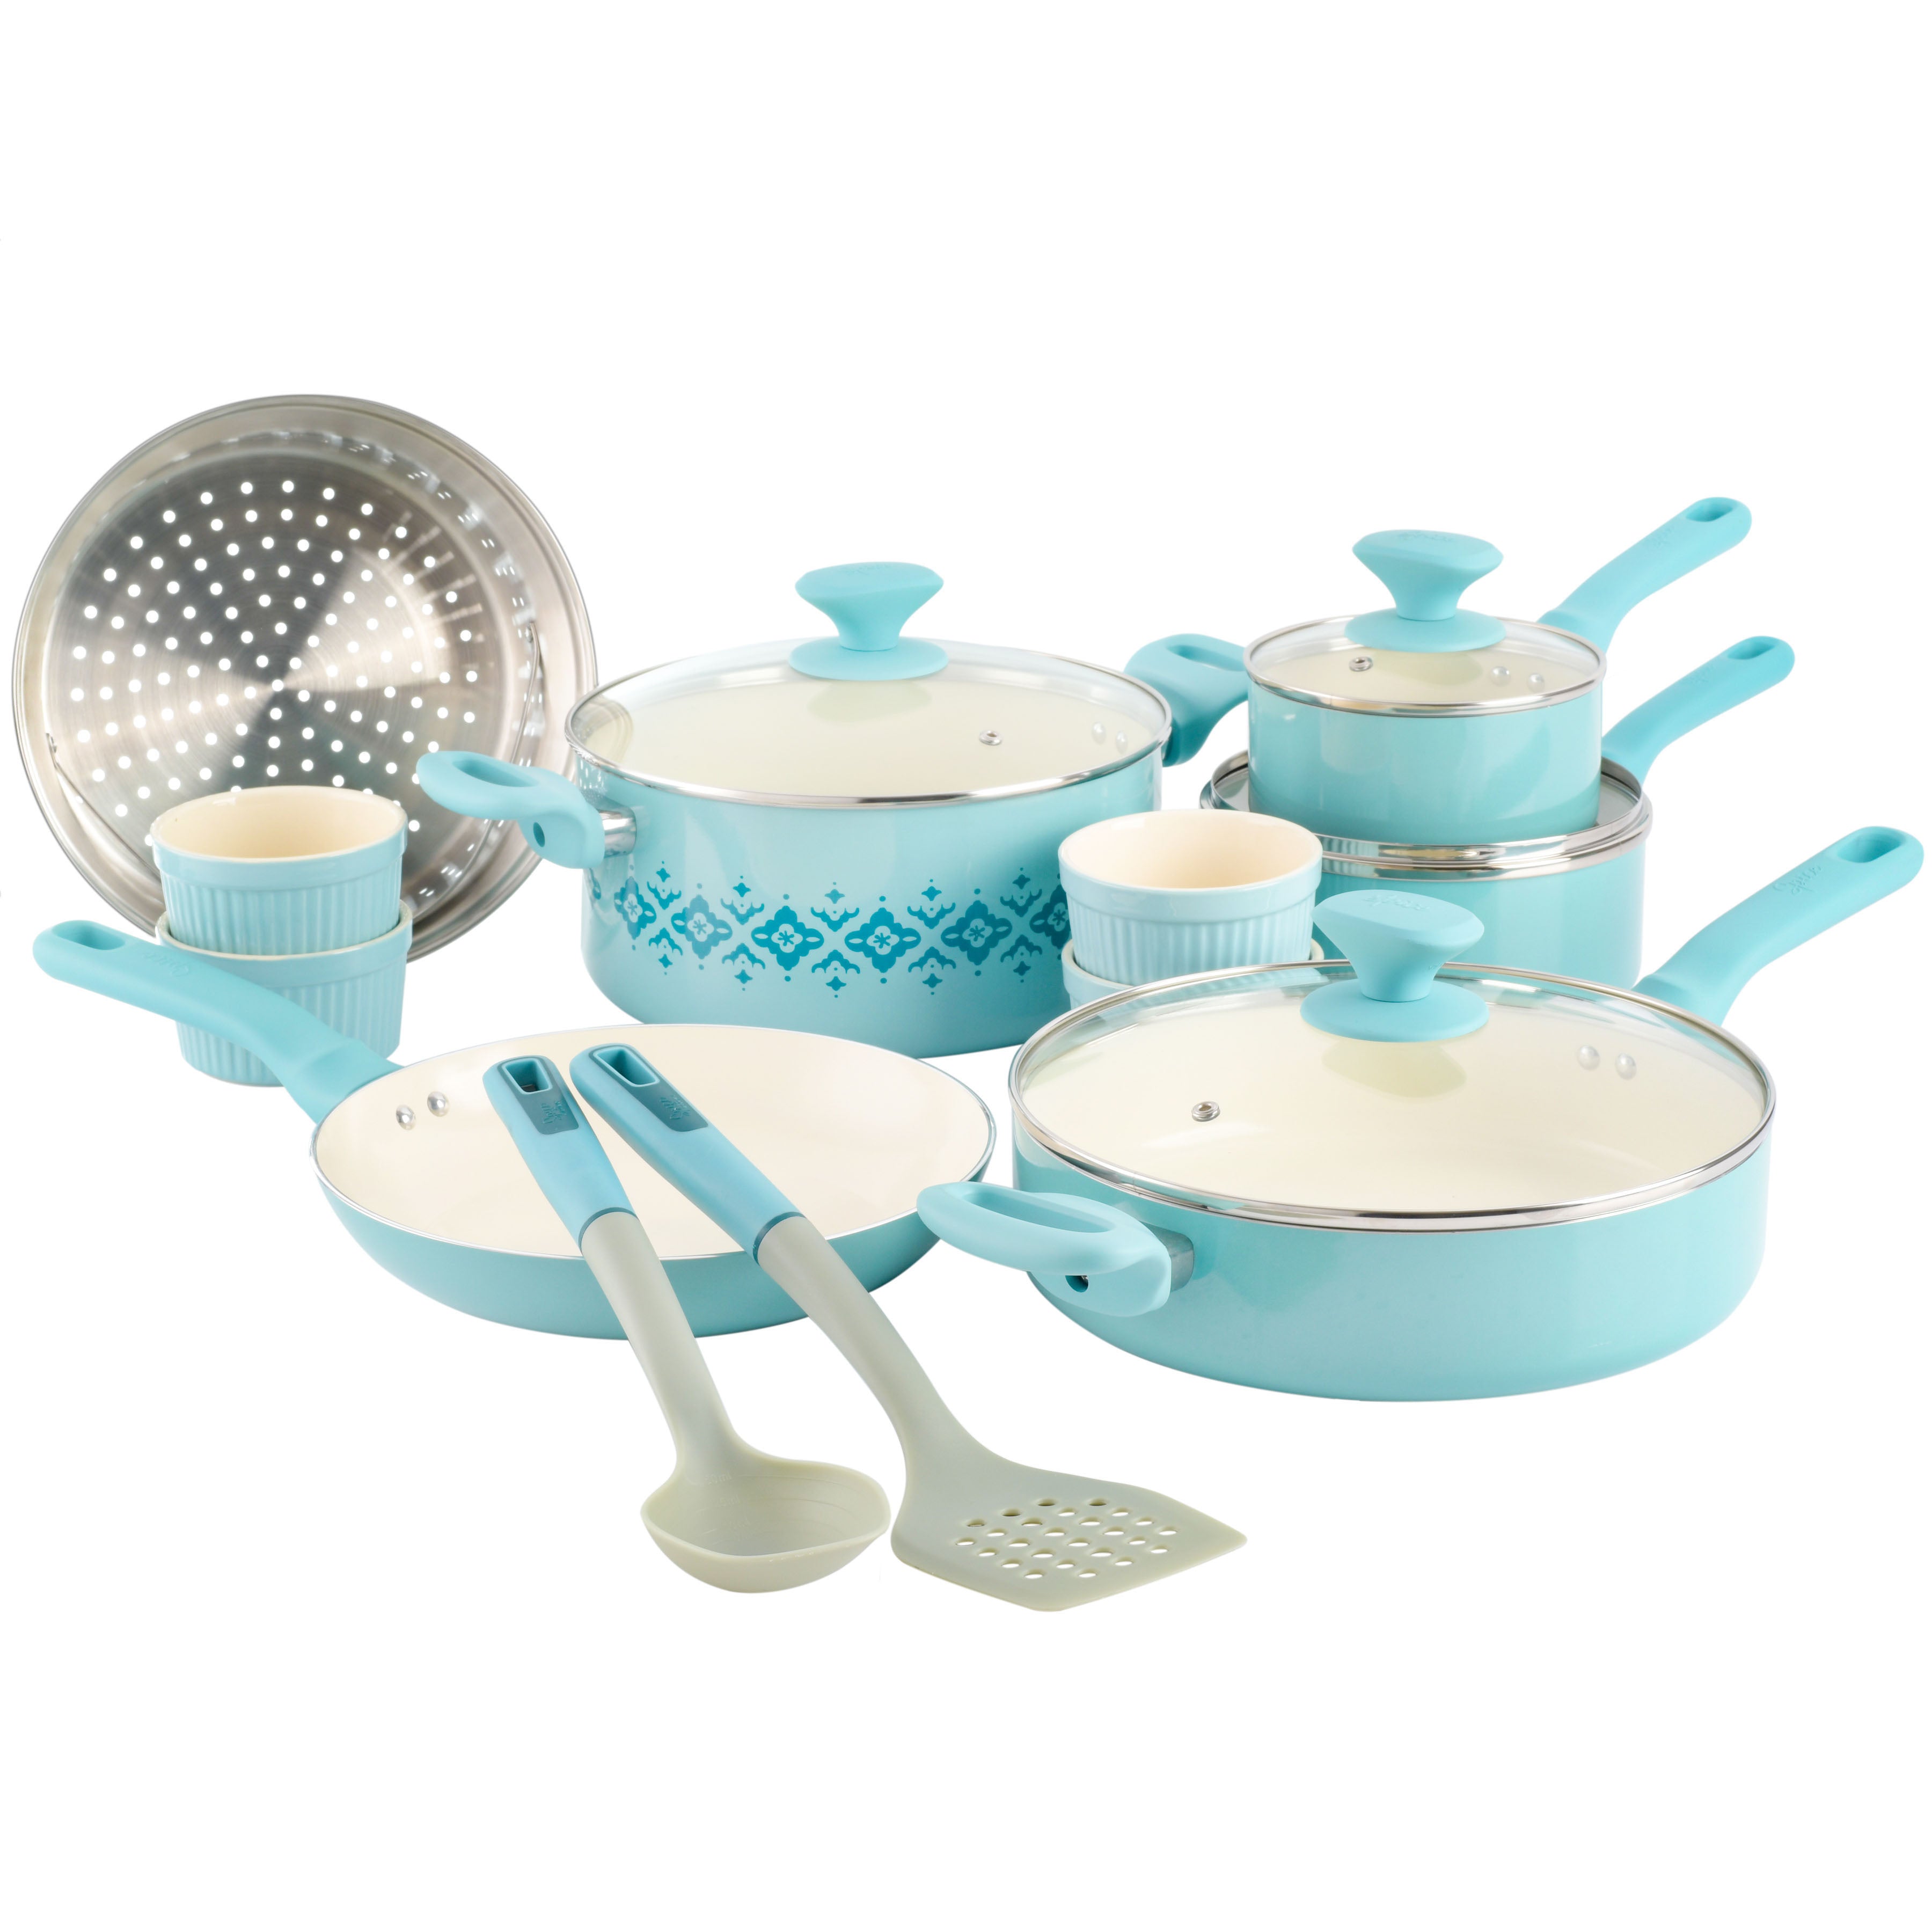 GreenLife 18-Piece Soft Grip Toxin-Free Healthy Ceramic Non-Stick Cookware Set, Turquoise